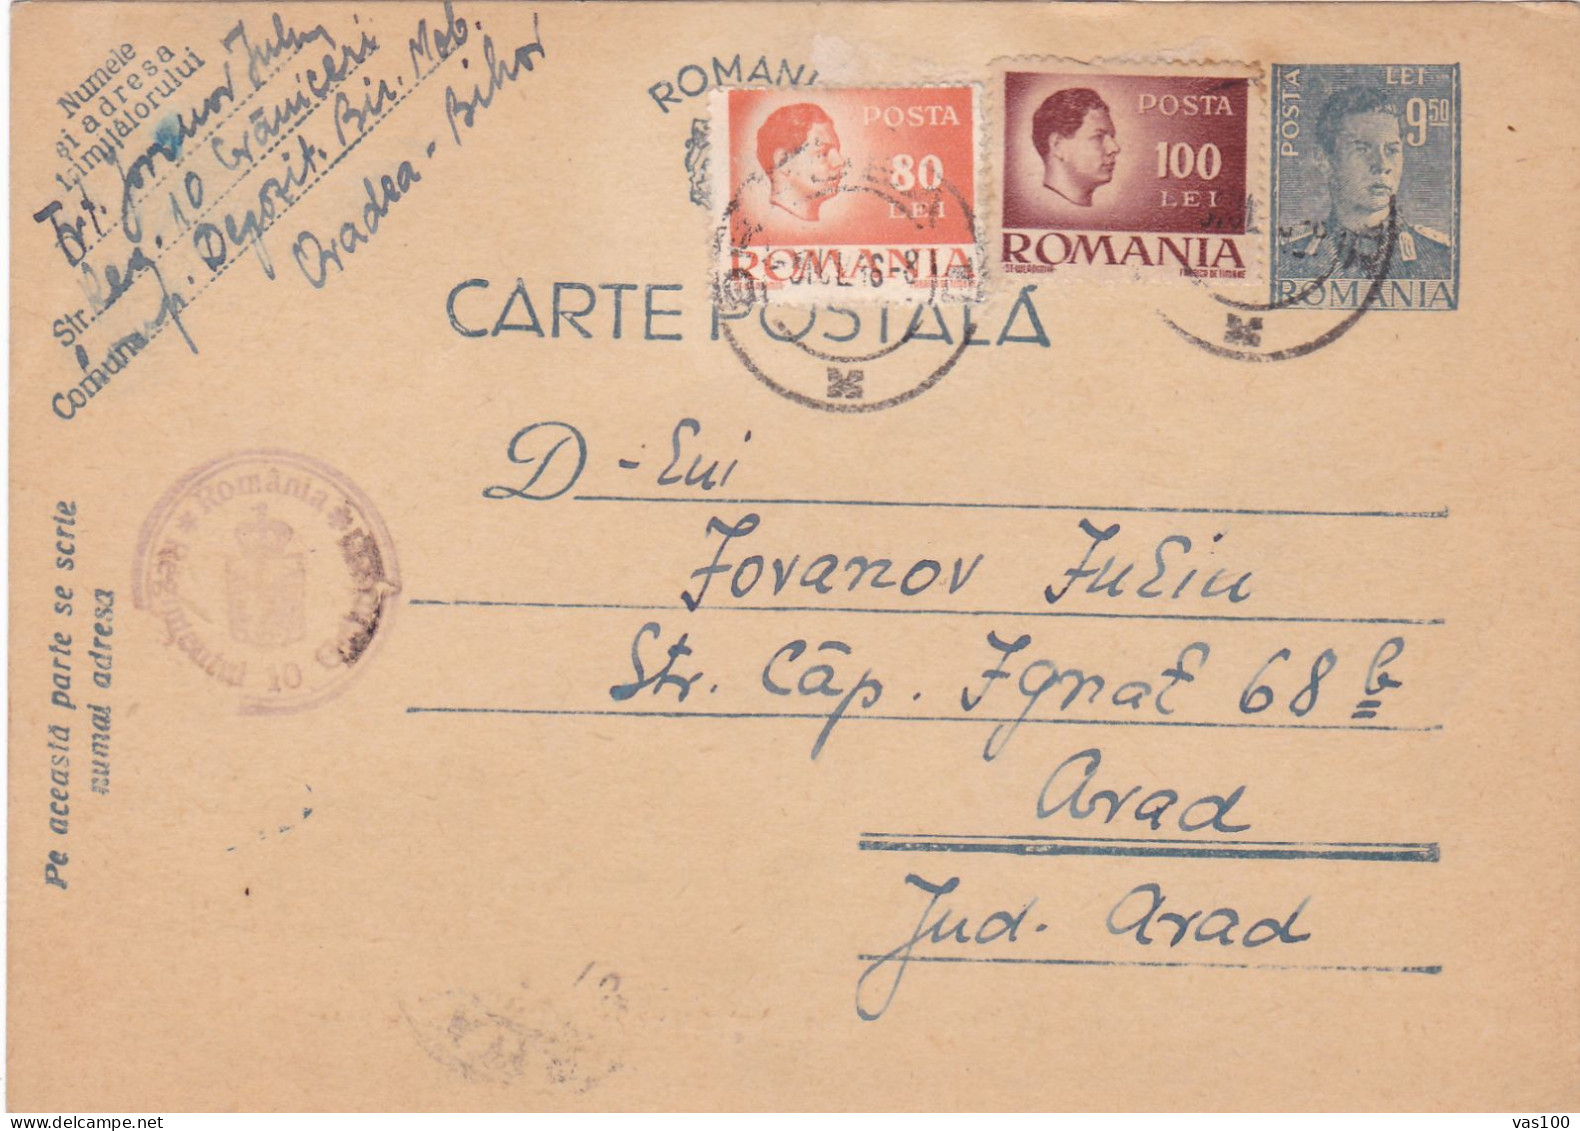 Romania, 1946, WWII Military Censored CENSOR ,POSTCARD STATIONERY, FROM ORADEA TO ARAD. - World War 2 Letters